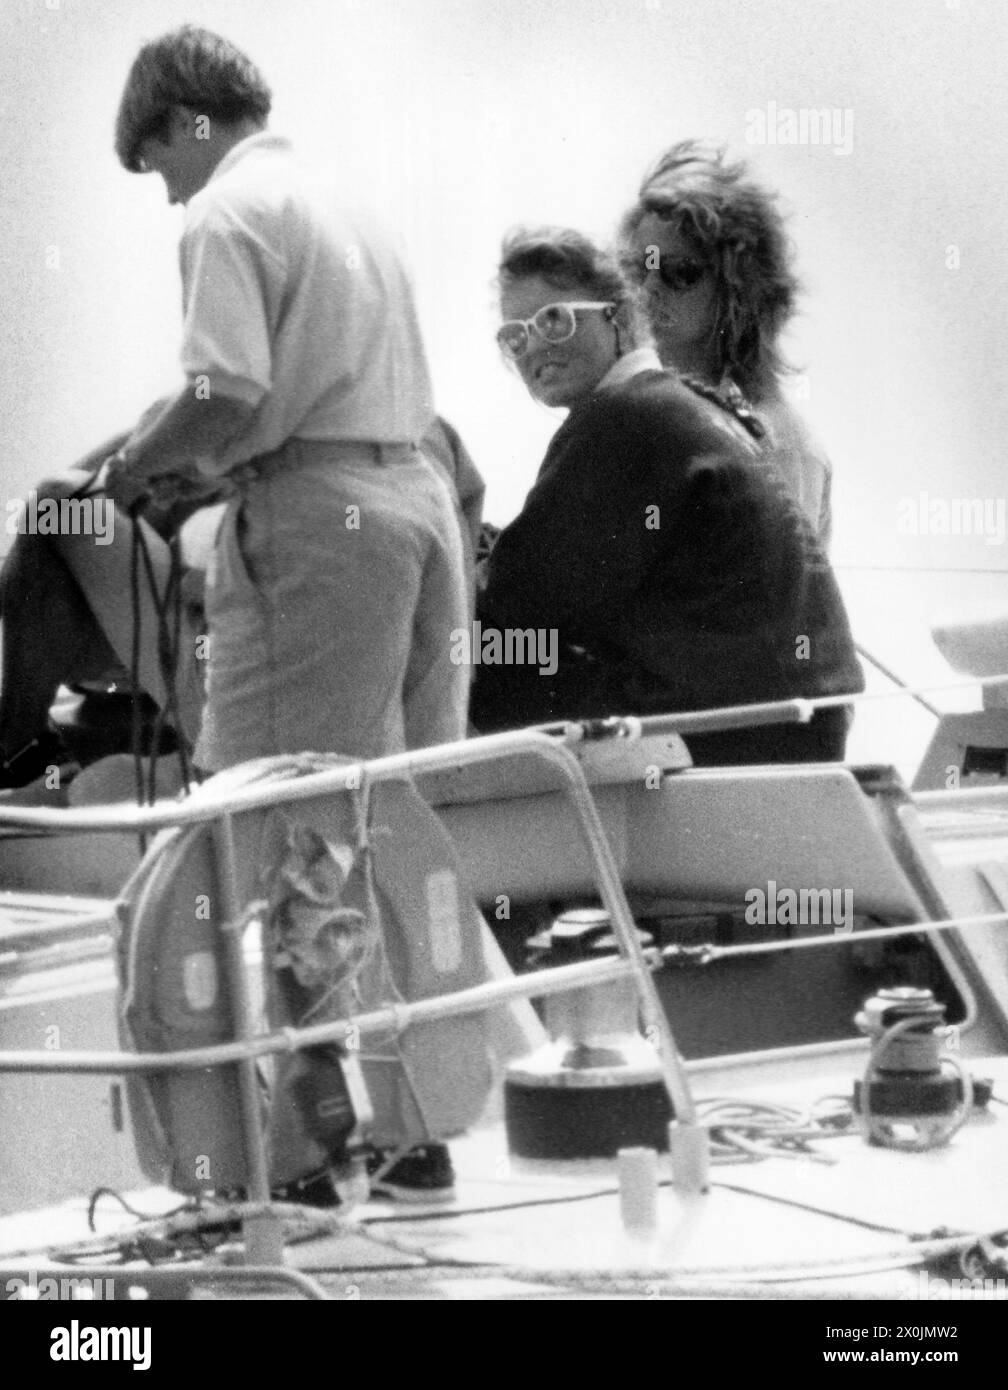 SARAH FERGUSON , THE DUCHESS OF YORK ABOARD THE YACHT MAIDEN WITH SKIPPER TRACY EDWARDS. JULY 1989 PIC MIKE WALKER 1989 Stock Photo